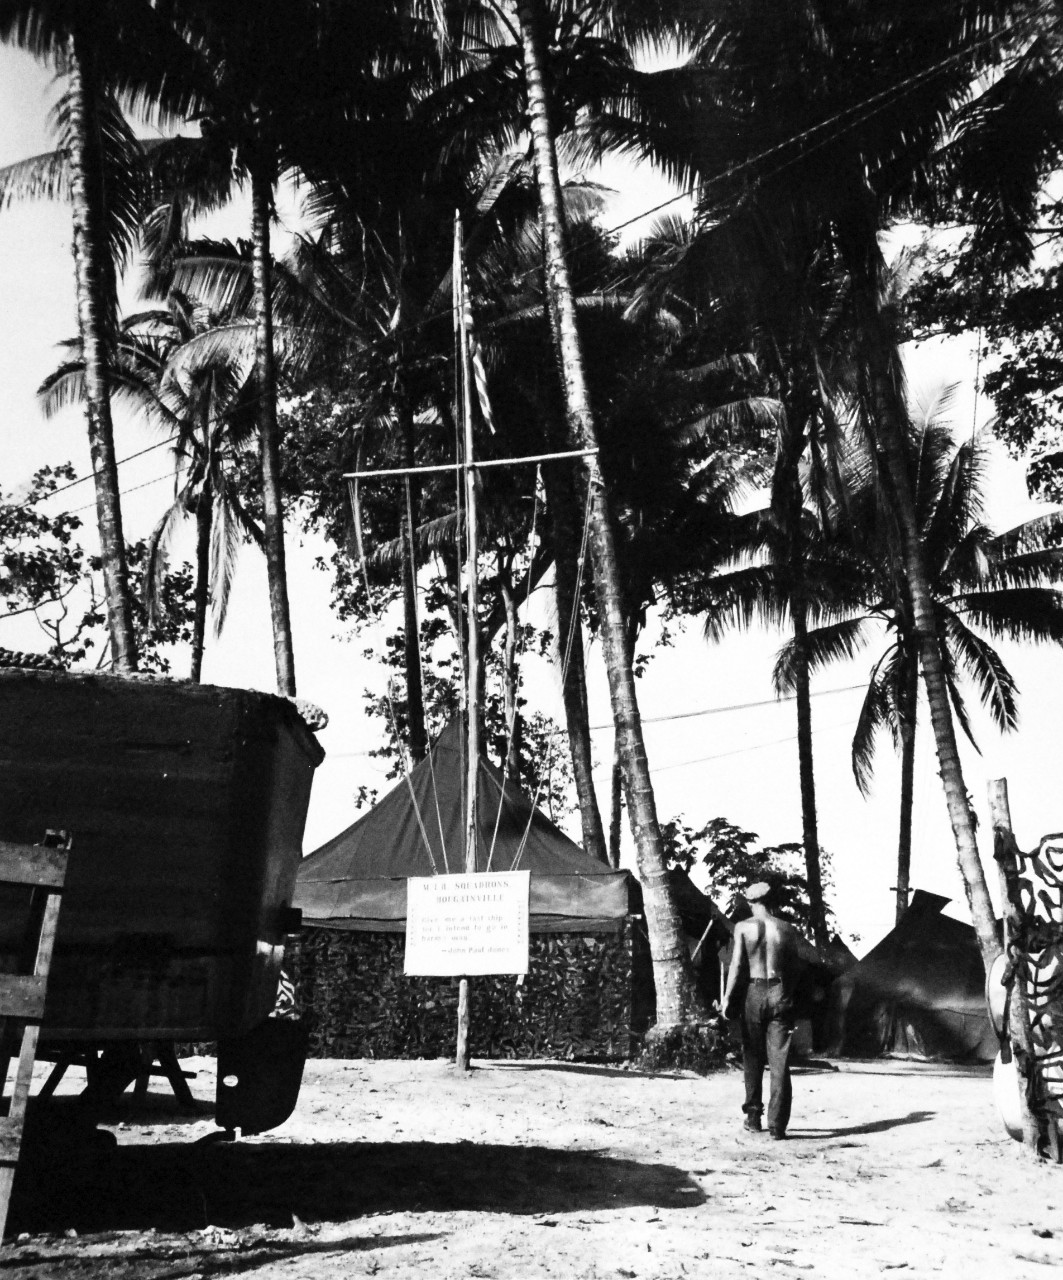 80-G-59331:   Bougainville Campaign, November 1943-August 1945.   U.S. Navy Motor Torpedo Base, Bougainville, Solomon Islands, 10 March 1944.  Entrance to the base.  Note, the squadrons scoreboard with motto in foreground.    Official U.S. Navy Photograph, now in the collections of the National Archives.   (2014/3/12). 